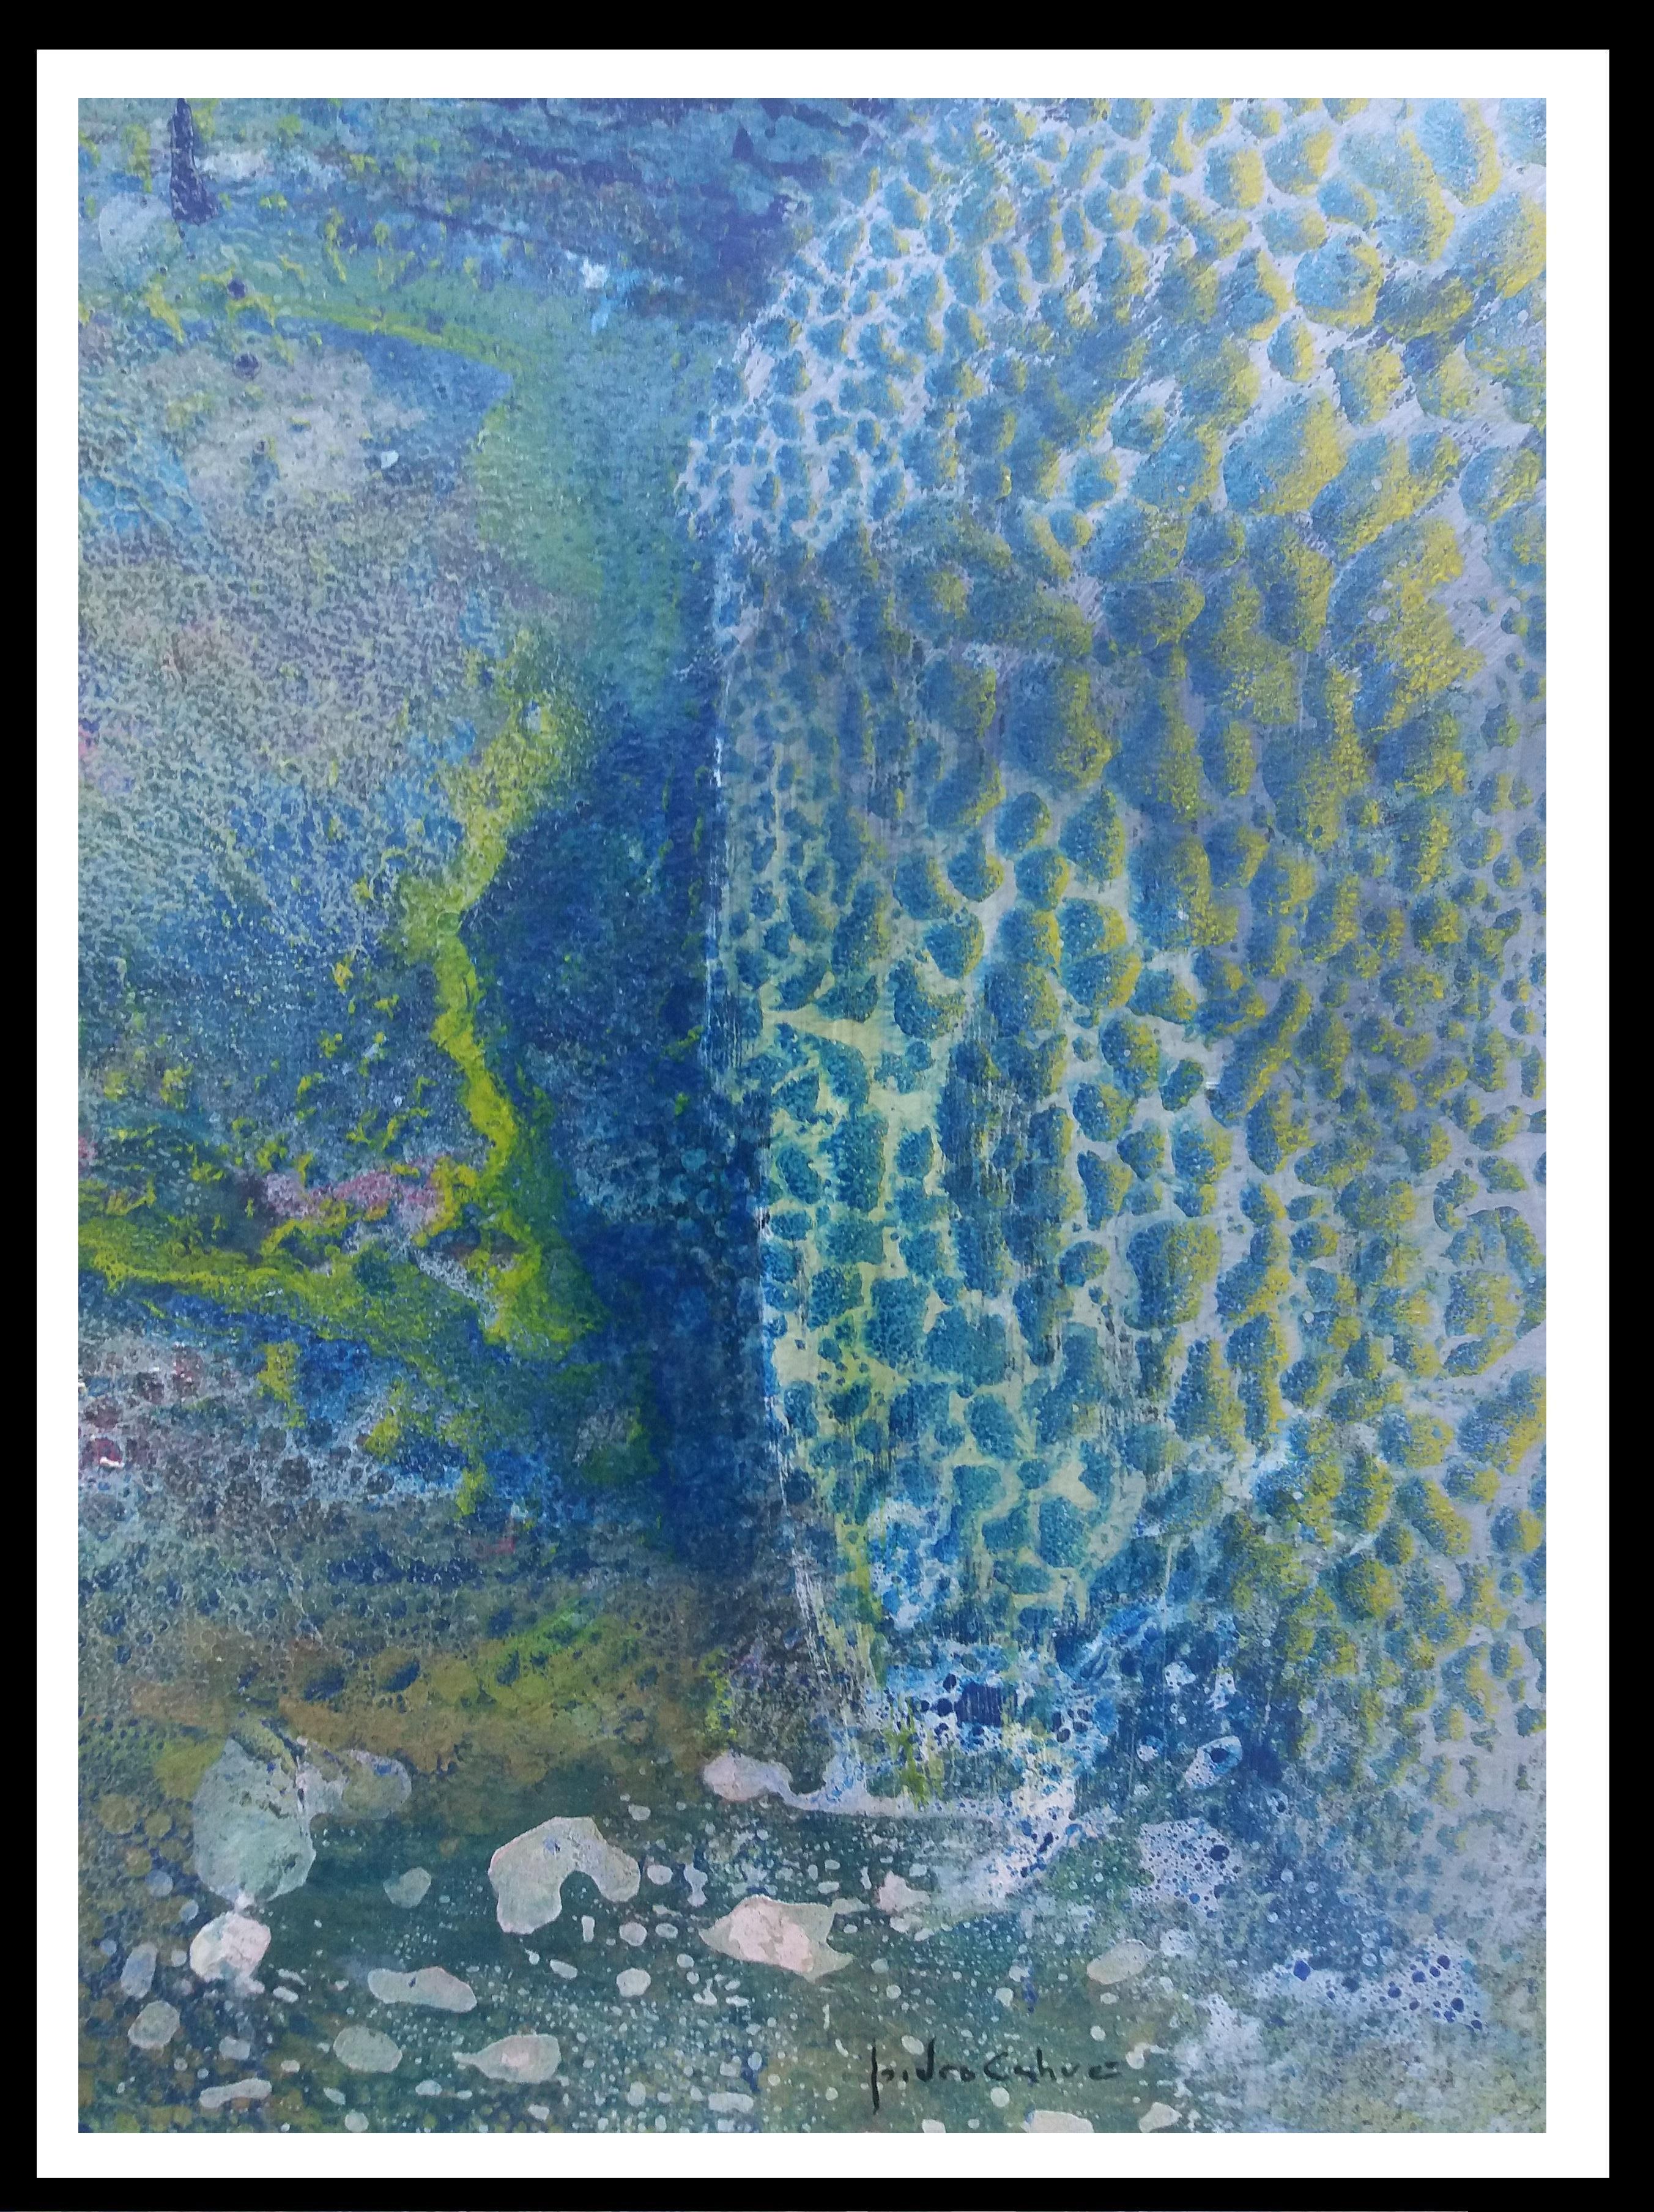  I. Cahue   Vertical  Blue Drops Effect    original  acrylic paper painting